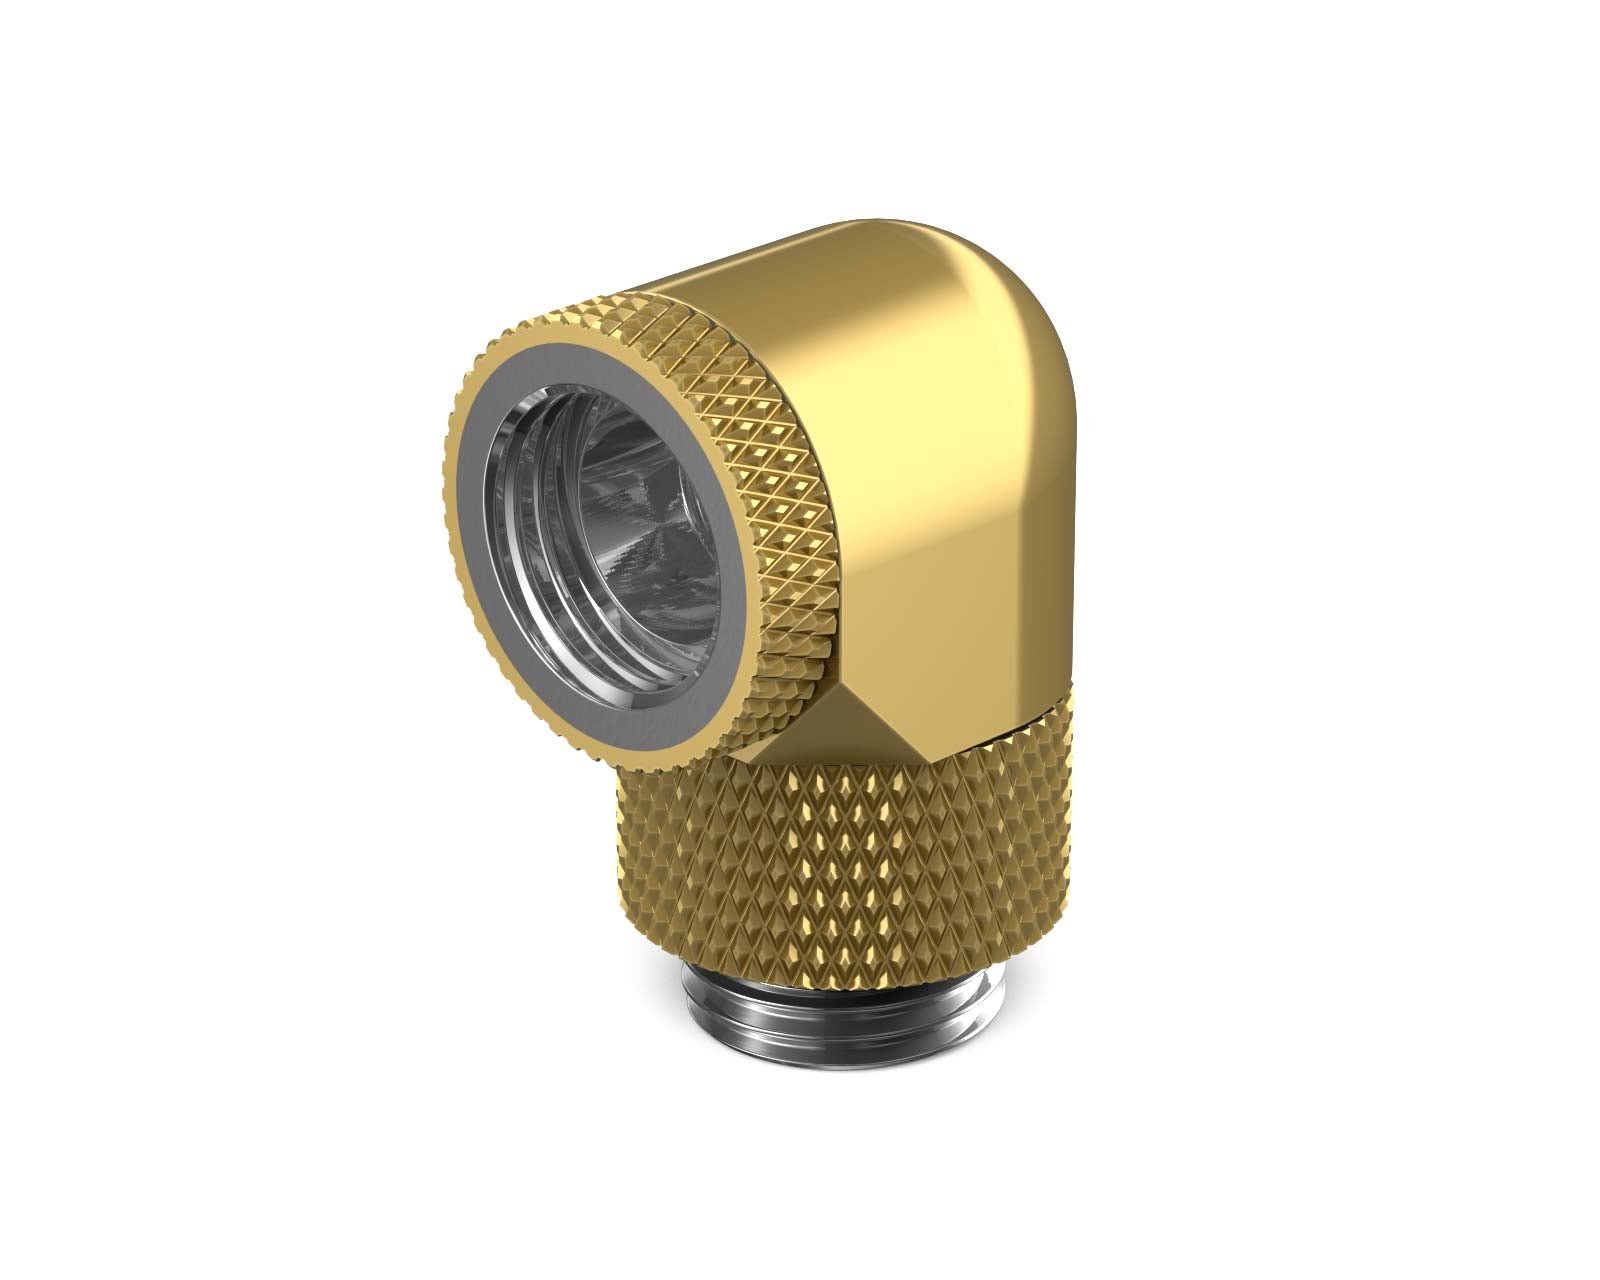 PrimoChill Male to Female G 1/4in. 90 Degree SX Dual Rotary Elbow Fitting - PrimoChill - KEEPING IT COOL Candy Gold